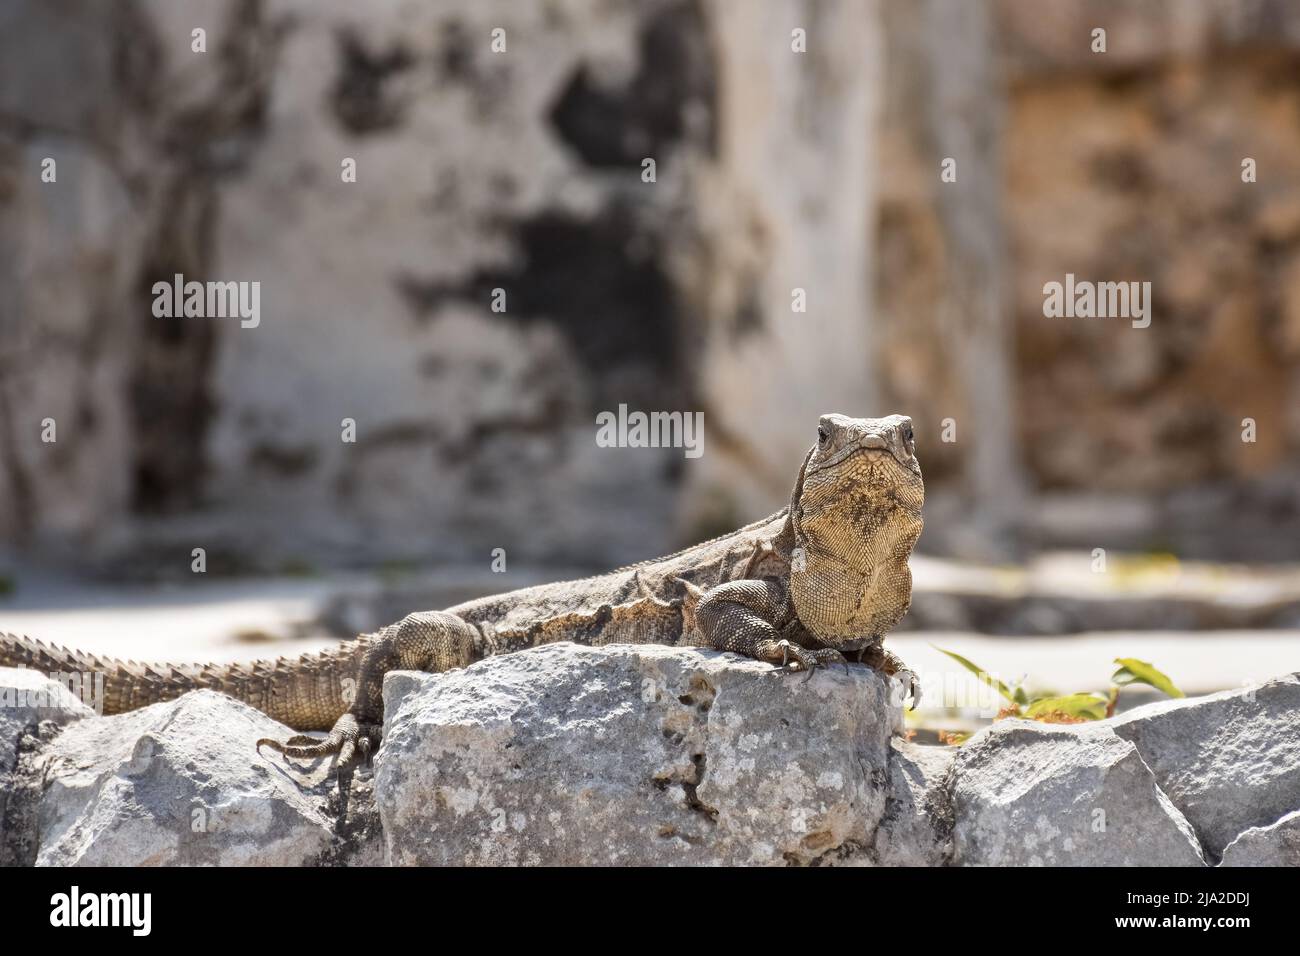 Iguana on a rock, in Tulum. Mexico. Horizontal photograph. In color. Stock Photo